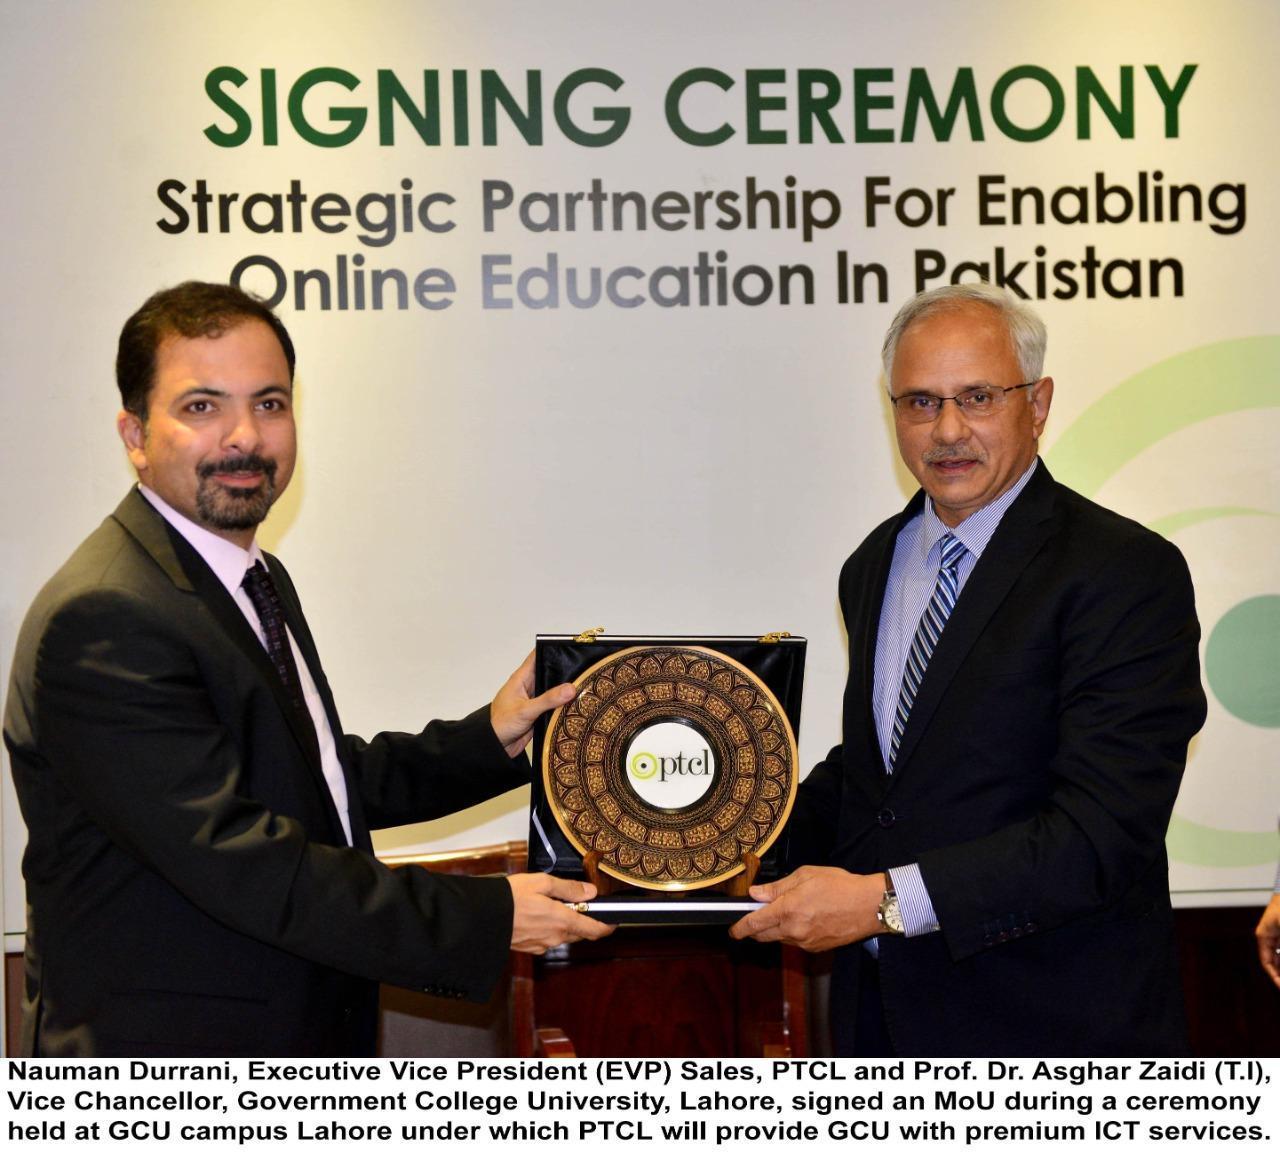 PTCL signs MoU with GCU for providing premium ICT services